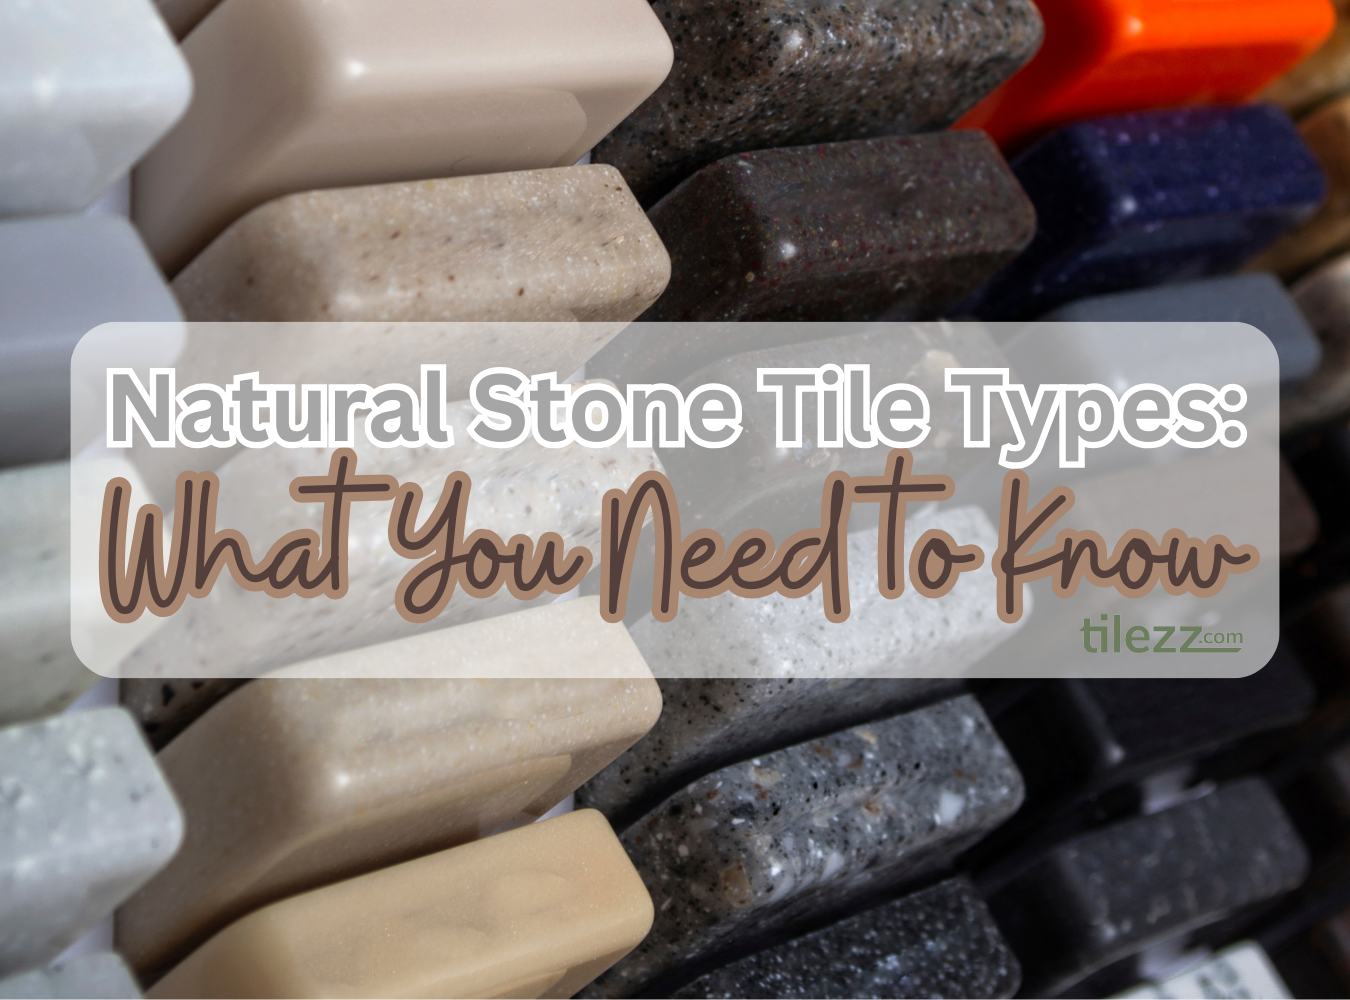 Natural Stone Tile Types: What You Need to Know